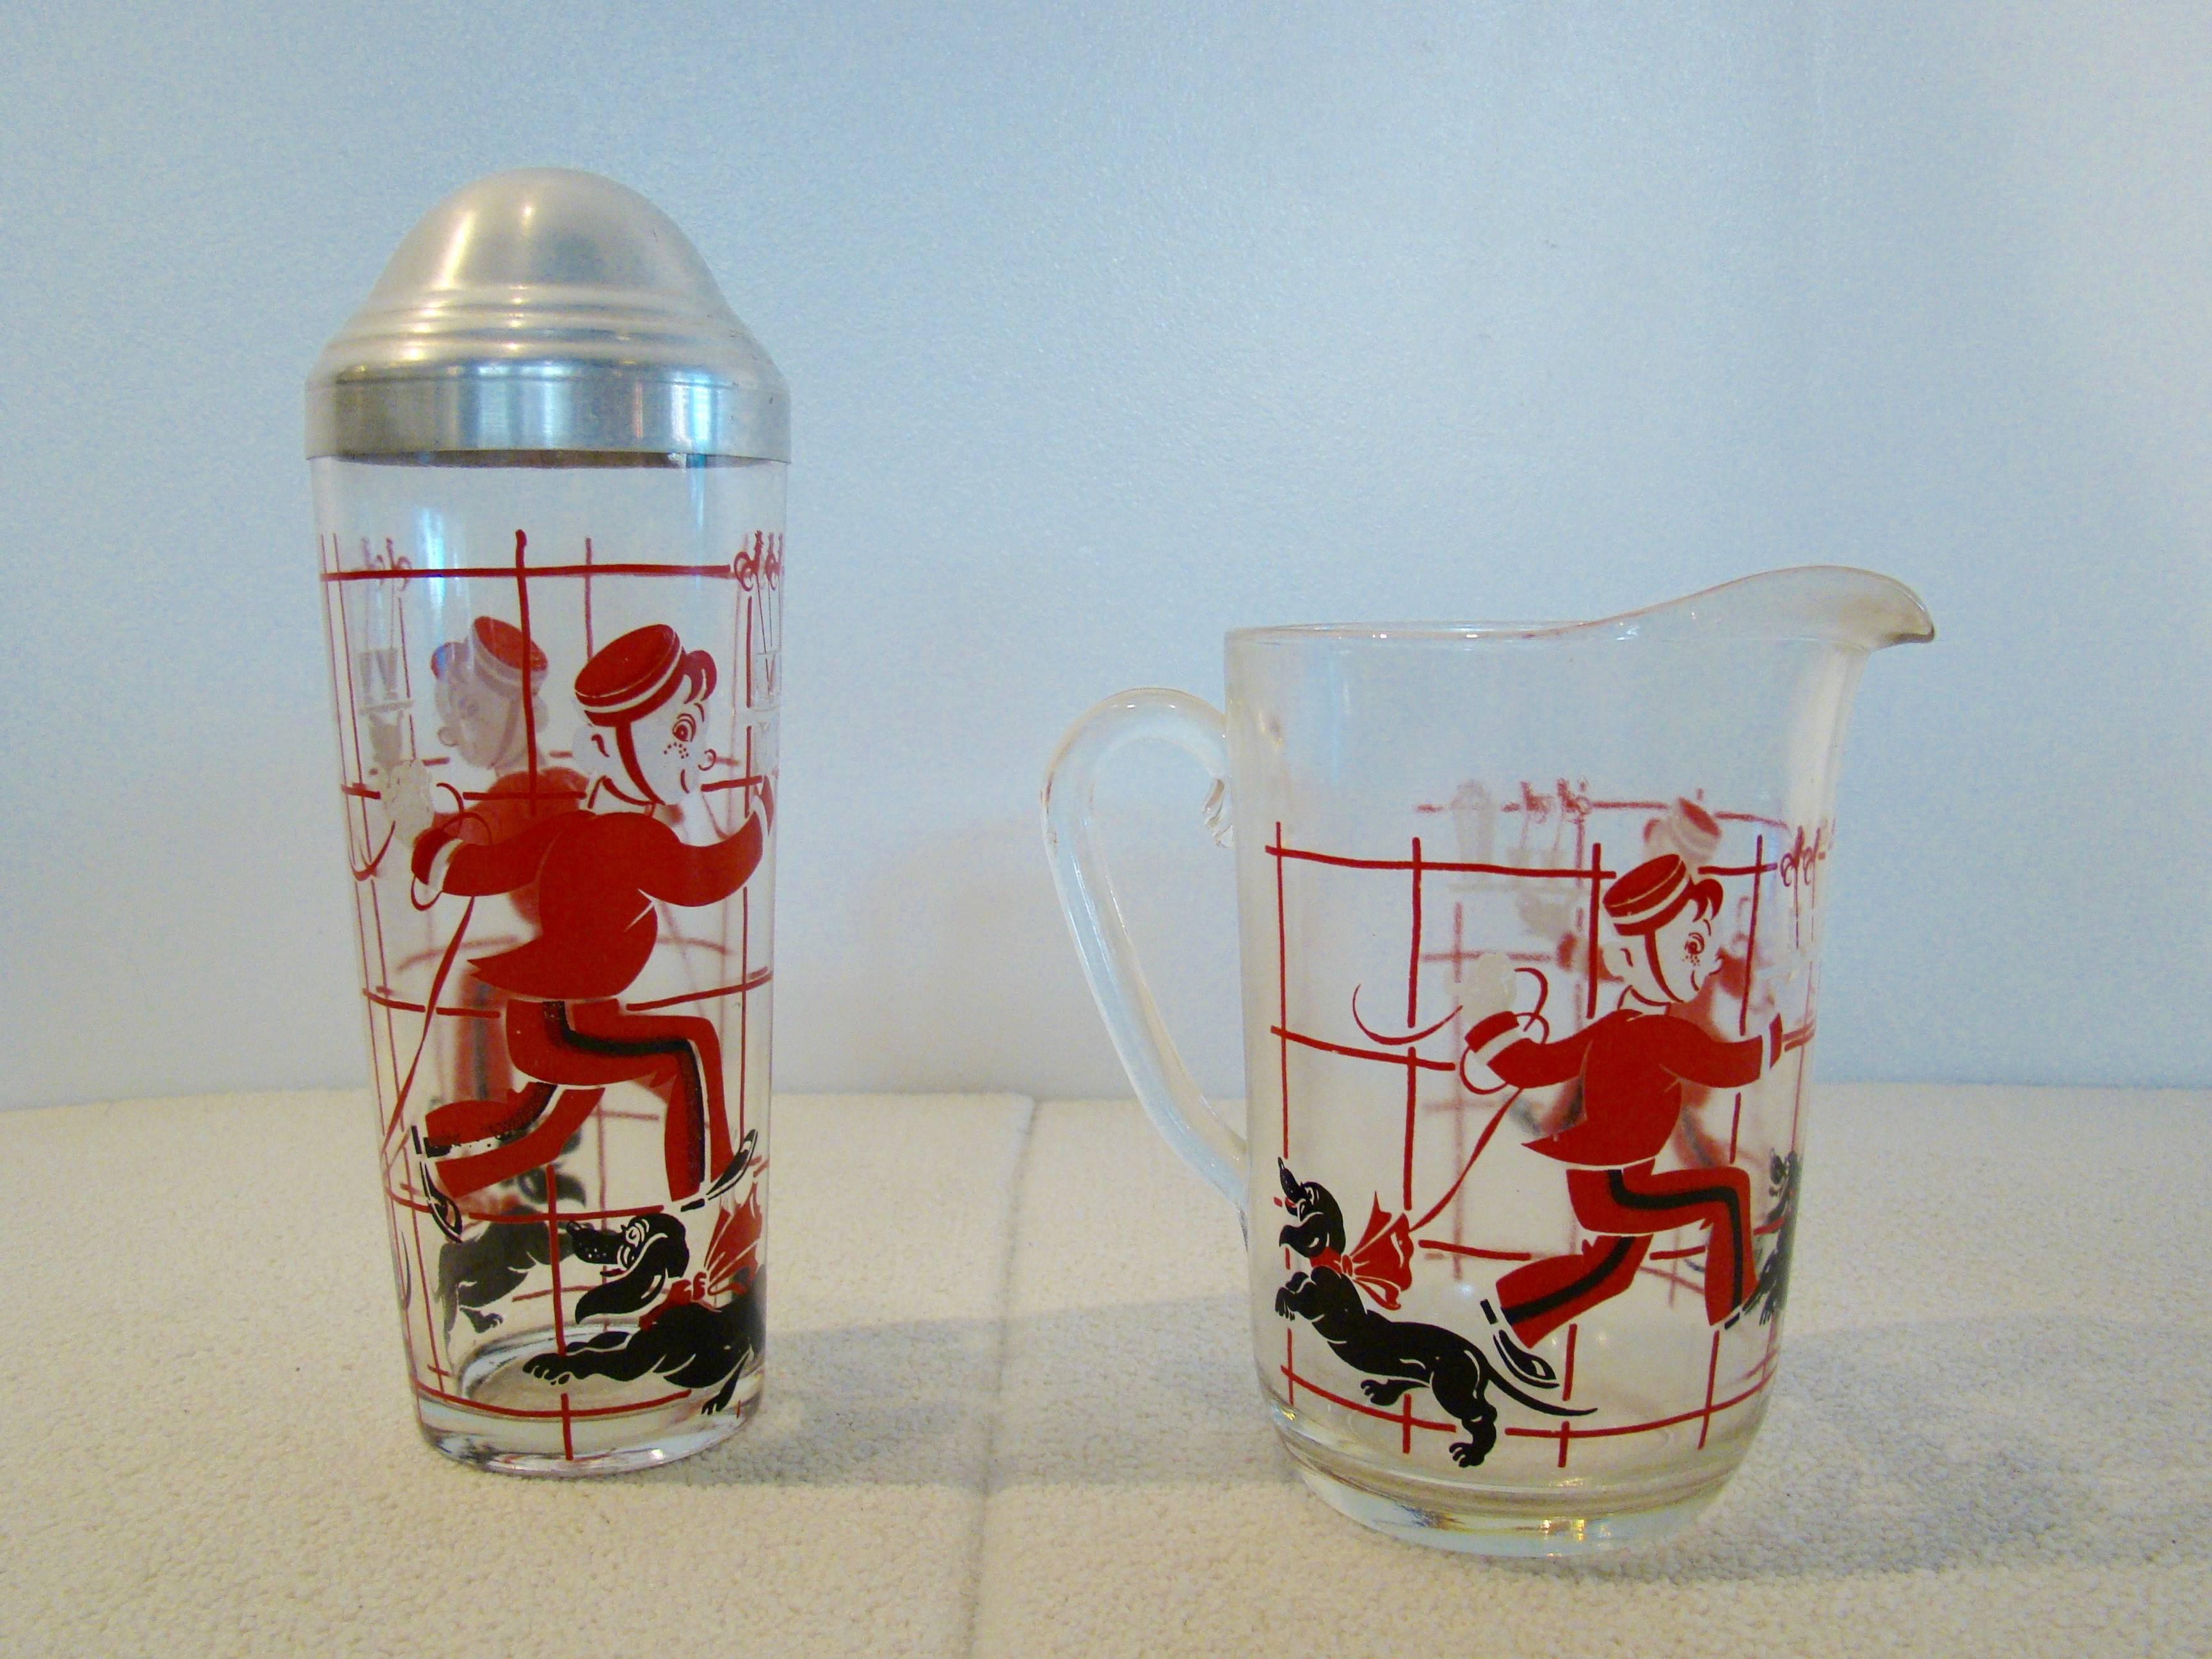 Whimsical silkscreen bellhop and dachshunds delivering cocktails, circa 1930s.
Hard to find Shaker and pitcher set. A nice addition to your barware collection.
Shaker has aluminum top.
Measures: Shaker is 10.5 